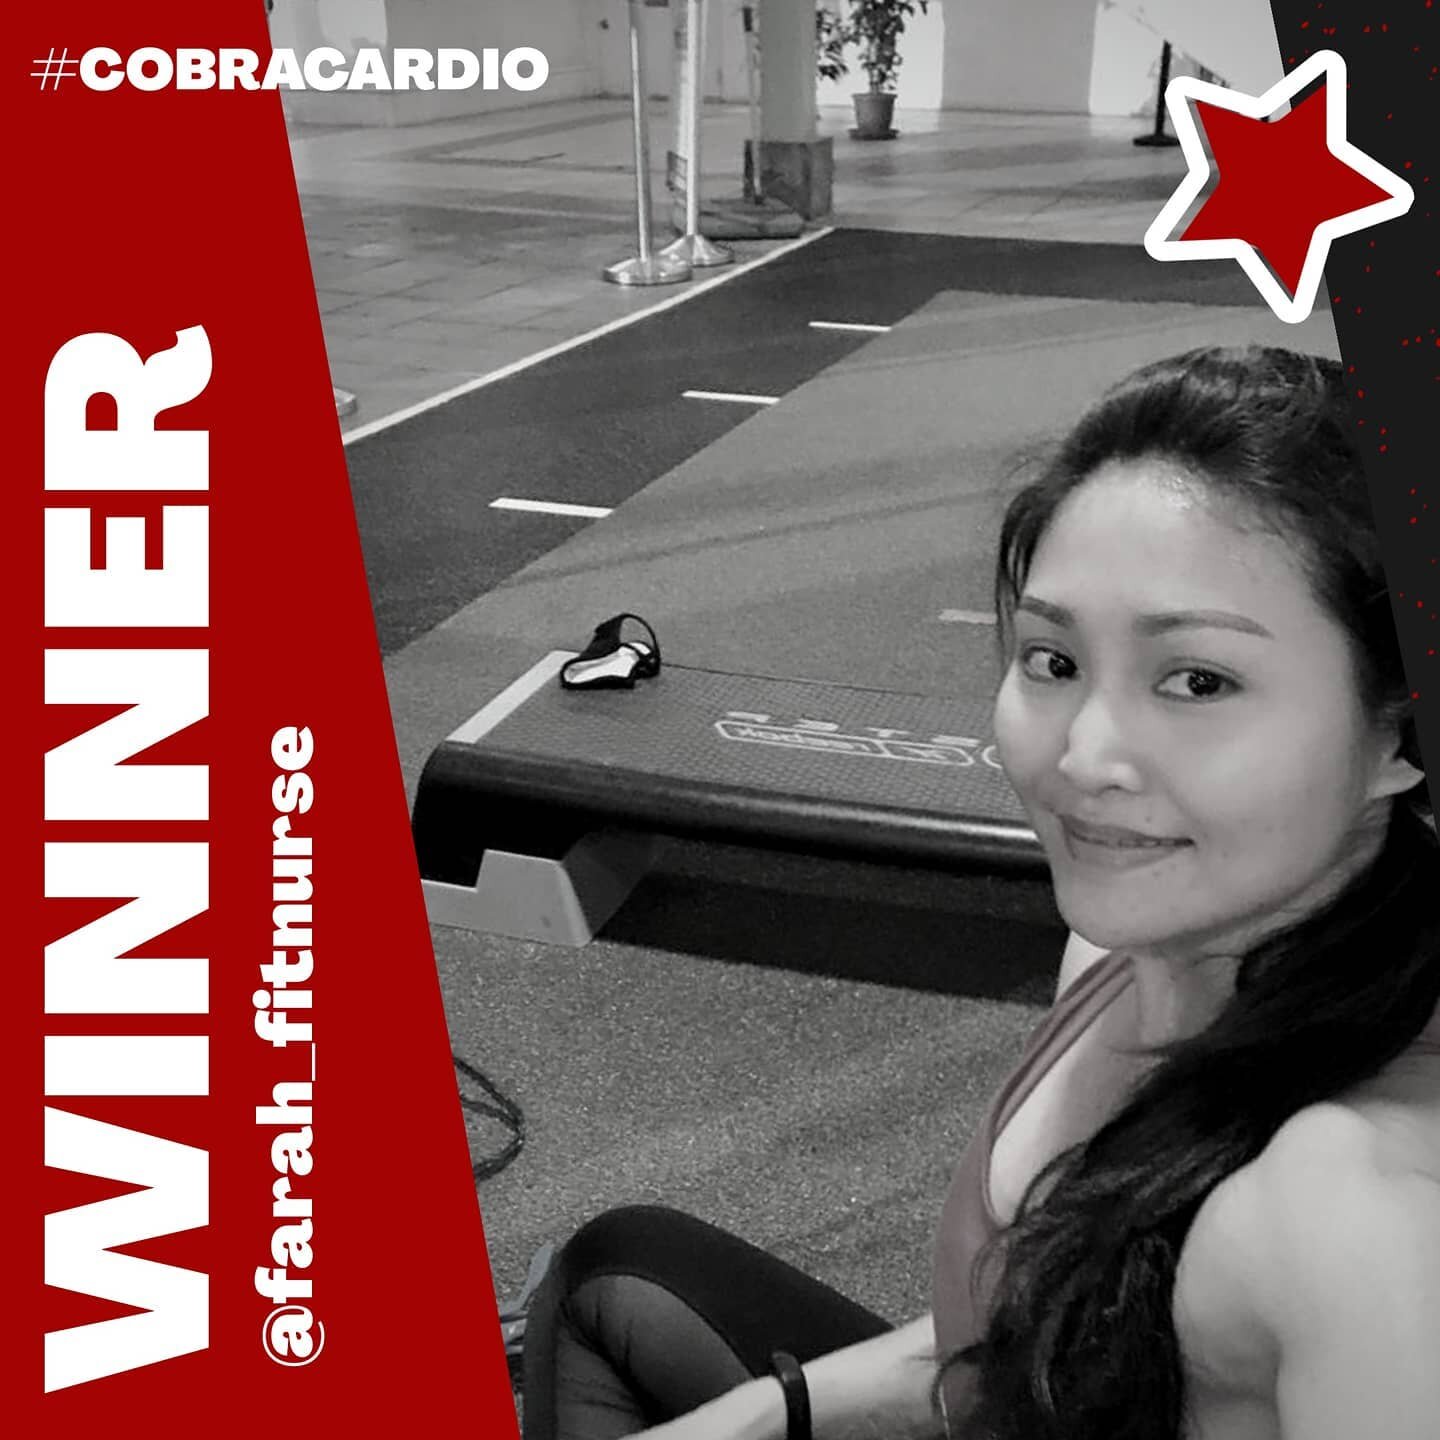 Our first #CobraCardio winner.....@farah_fitnurse! Congratulations and well done!
We will DM you for info on your private class 🥊💪

All our participants did such a great job. Look out for more #CobraCardio coming up soon!
.
.
.
#cobrafightgym #sing